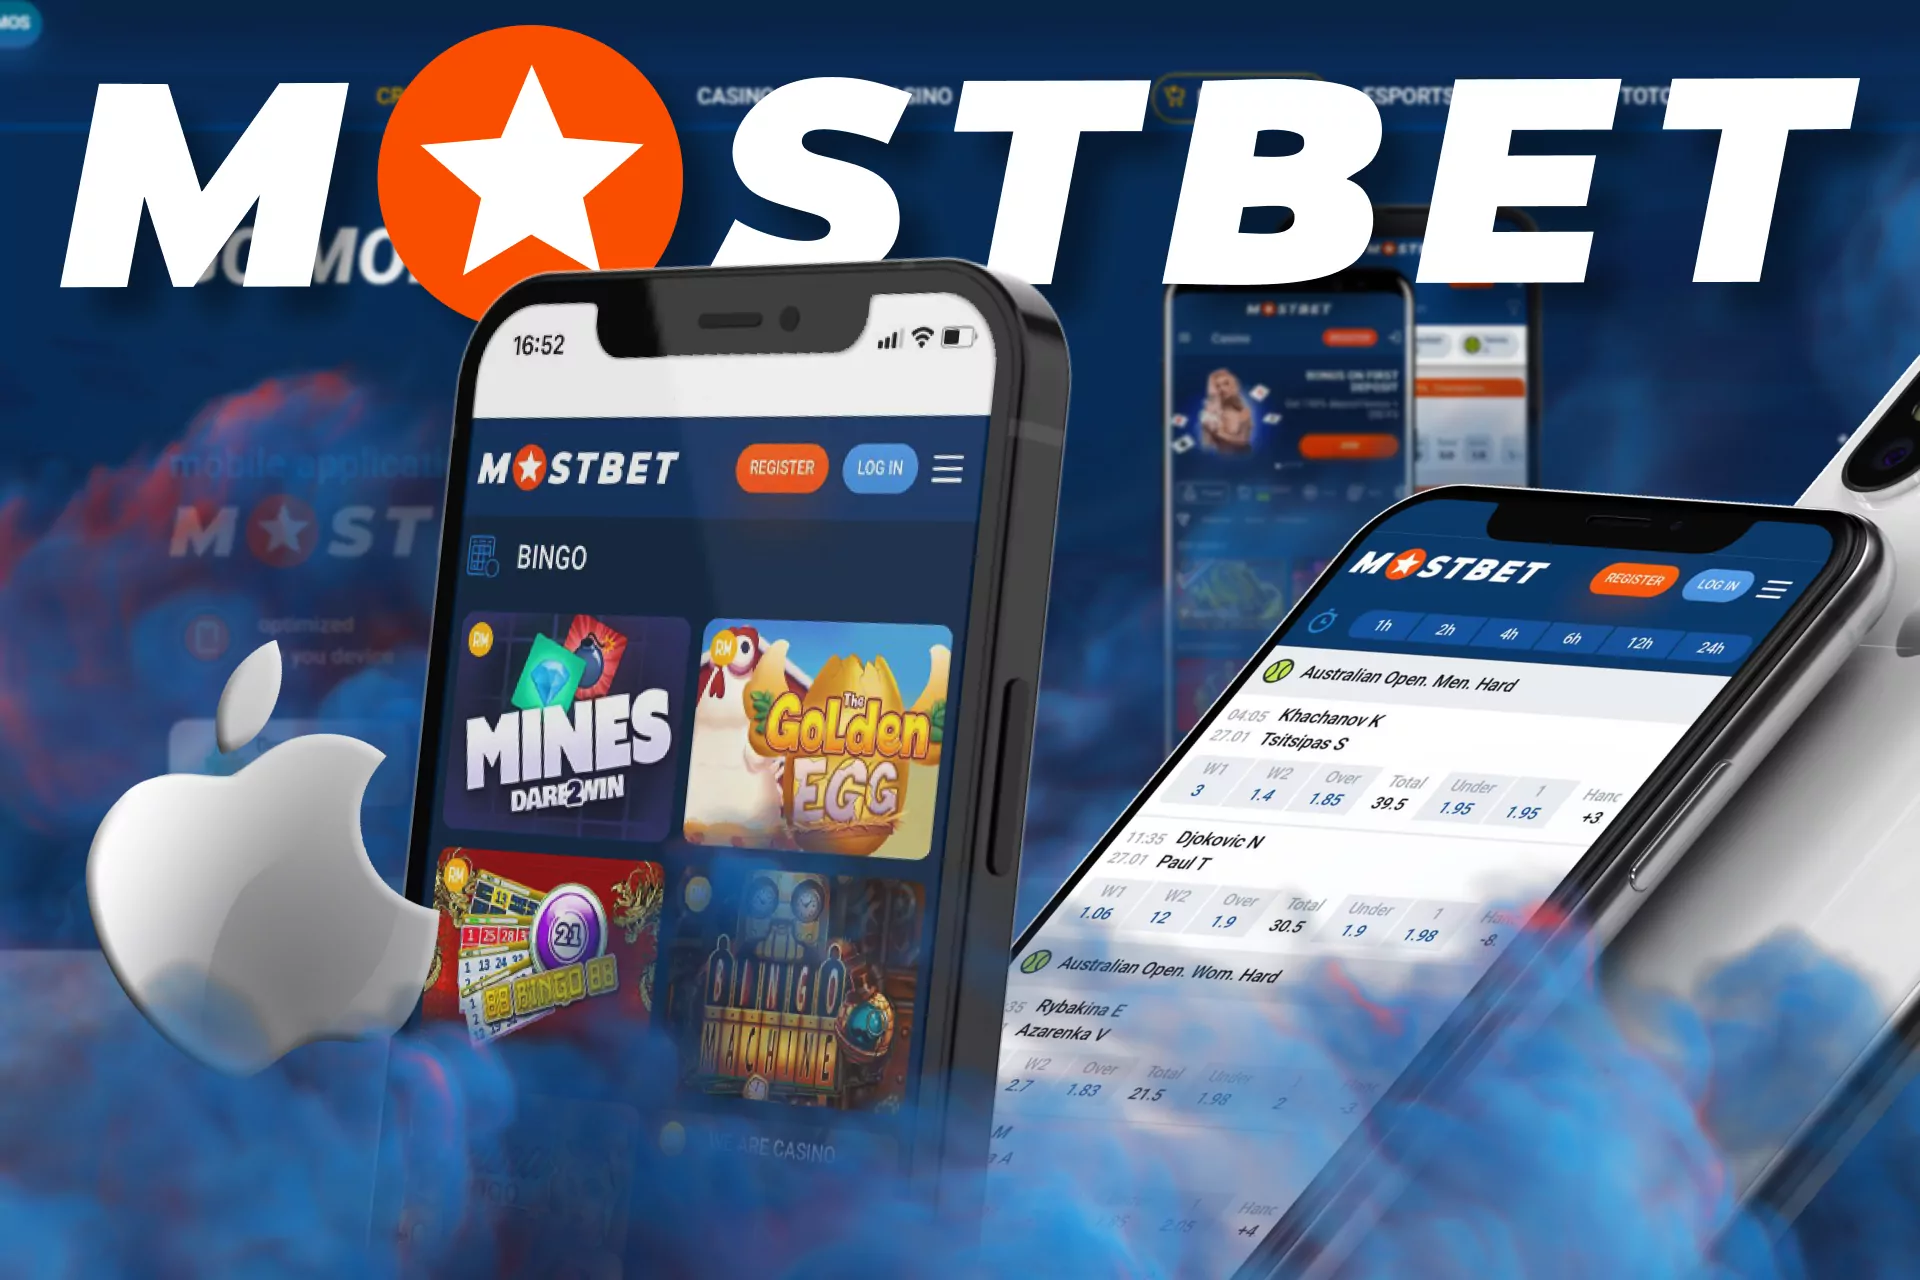 Advanced The Mostbet App is more than just a convenience; it’s a comprehensive tool for anyone interested in betting. With its easy-to-use interface, extensive betting options, live betting features, and insightful strategies from experts, the app is a valuable as